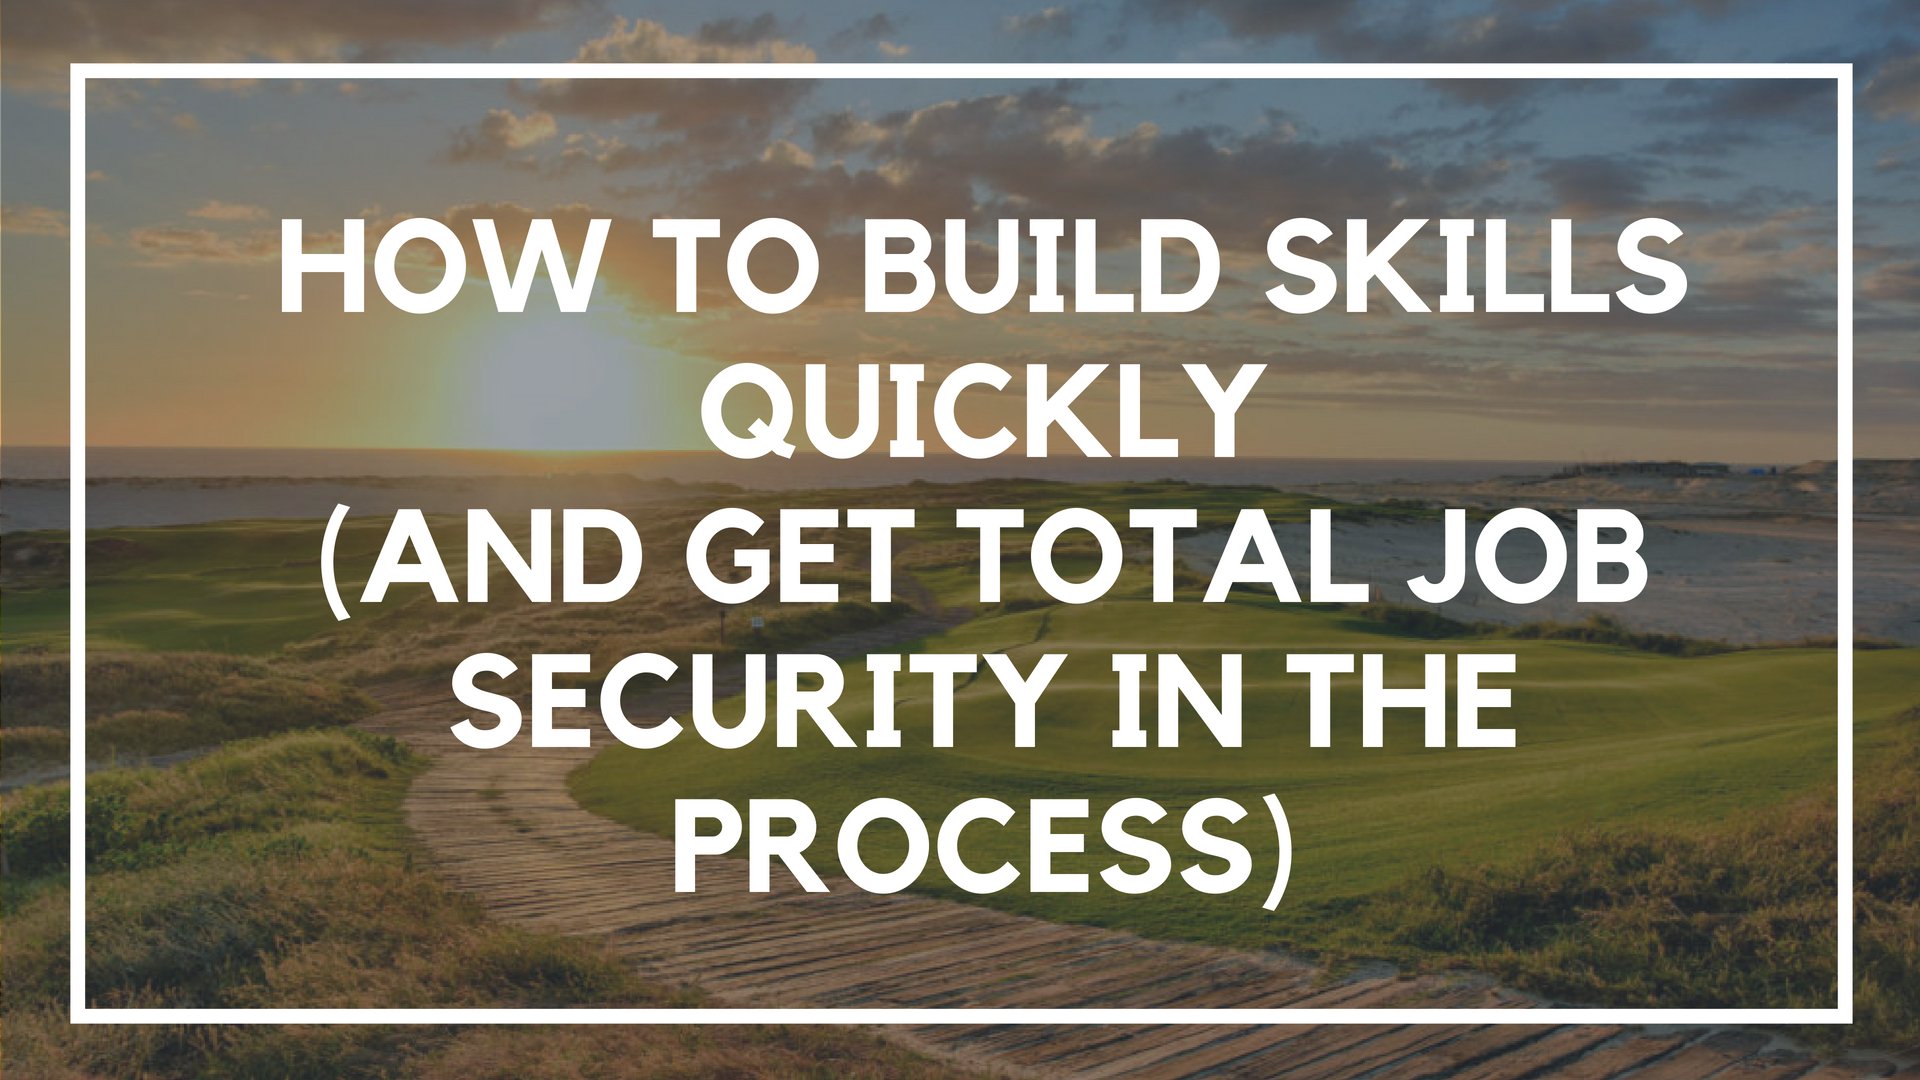 How to Build Skills Quickly (And Get Total Job Security in the Process)